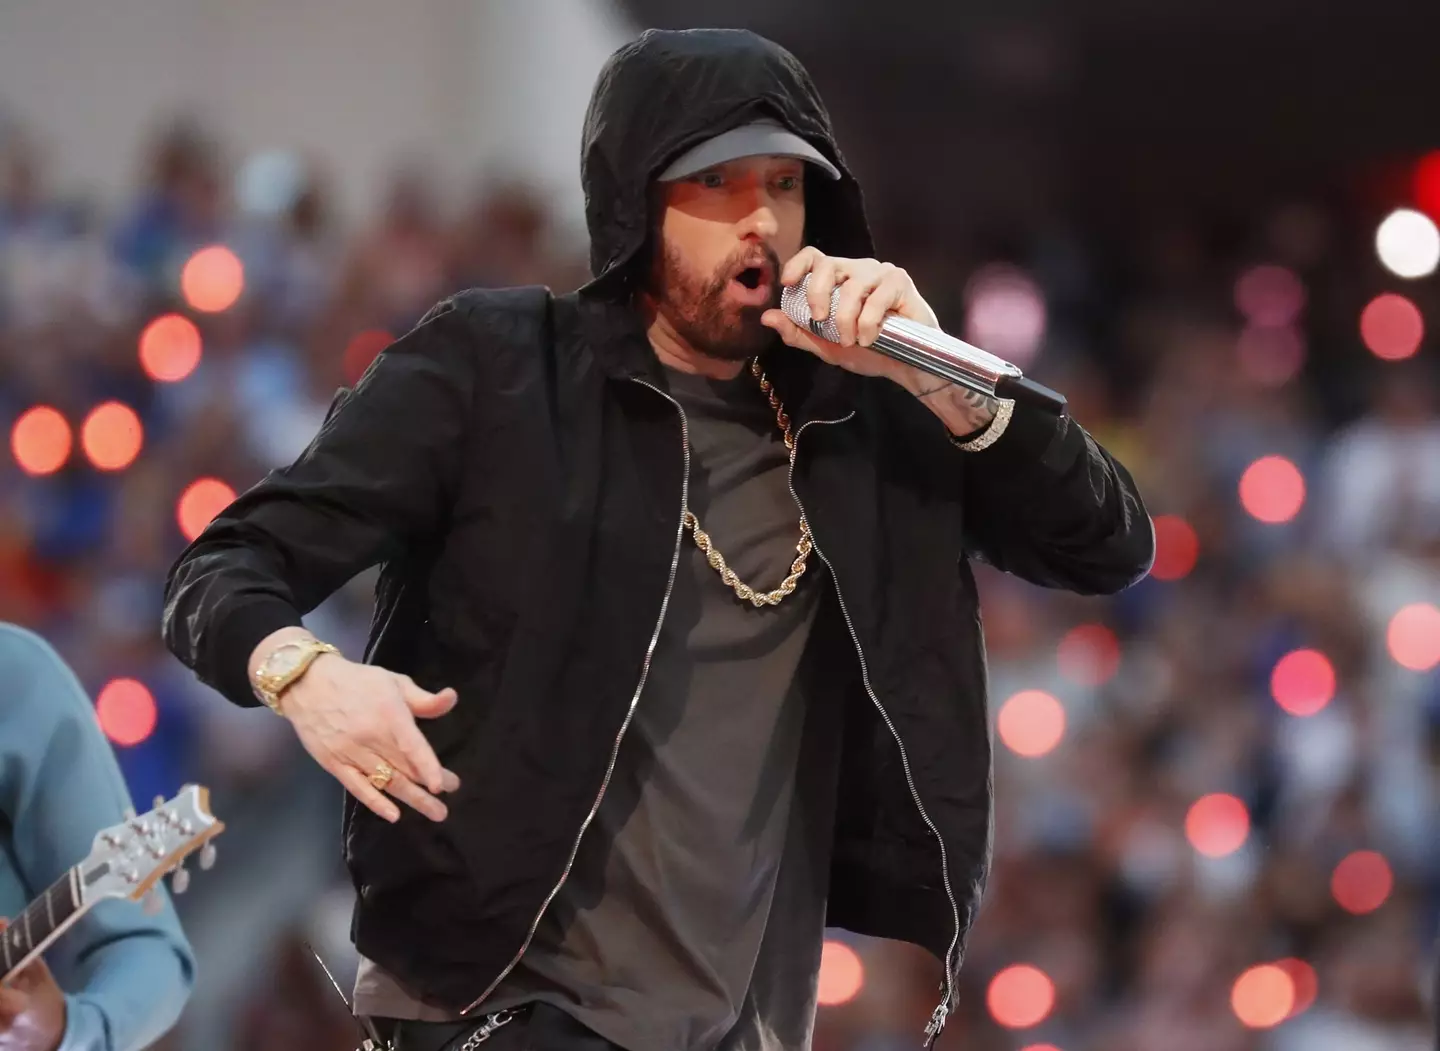 They said it couldn't be done, that nothing could rhyme with orange. But Eminem found a way.